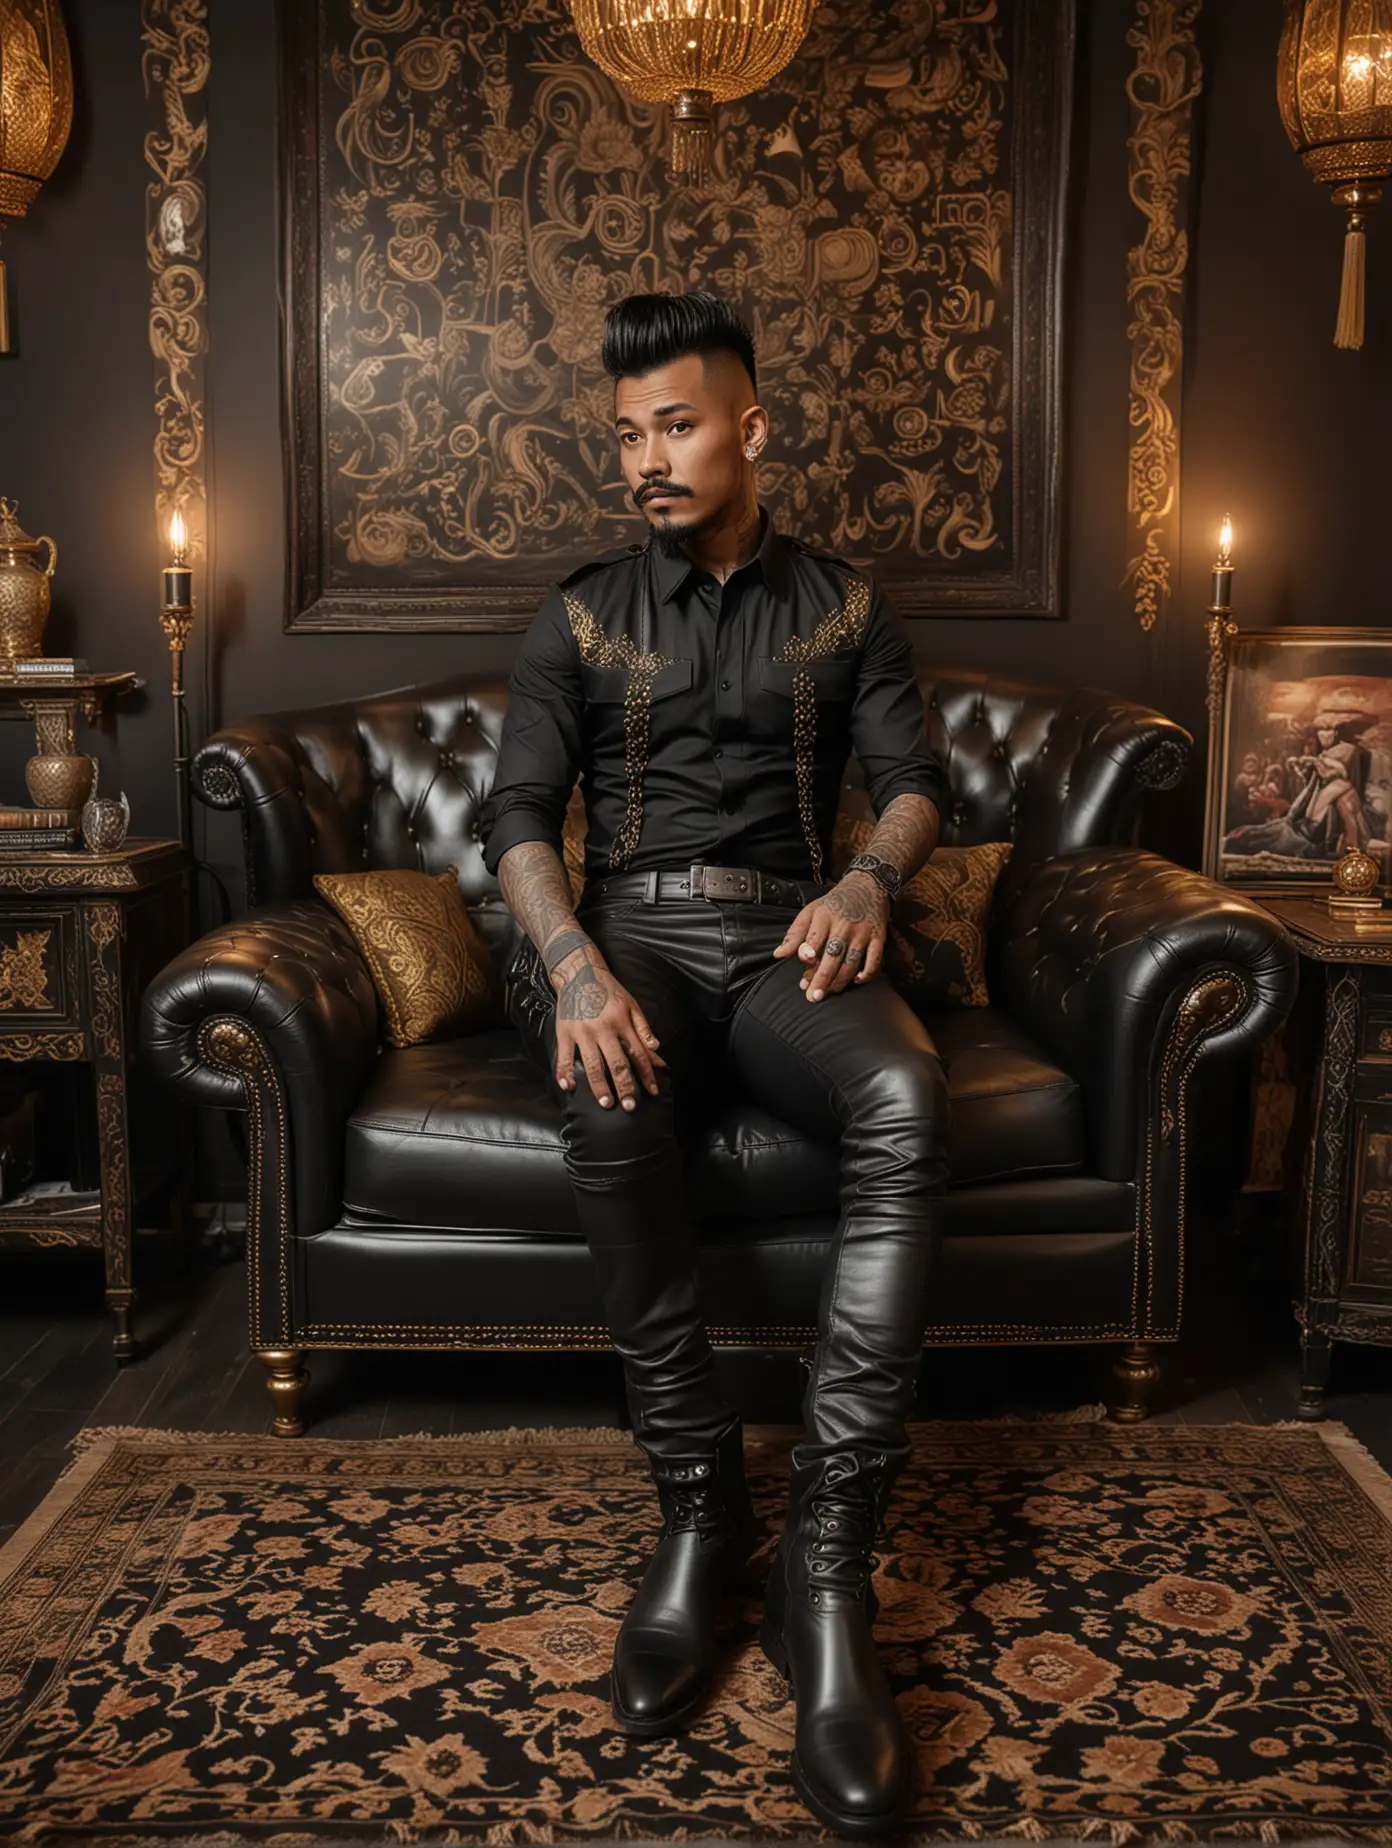 Stylish-Indonesian-Man-with-Tattoos-Relaxing-in-Opulent-Black-and-Gold-Decor